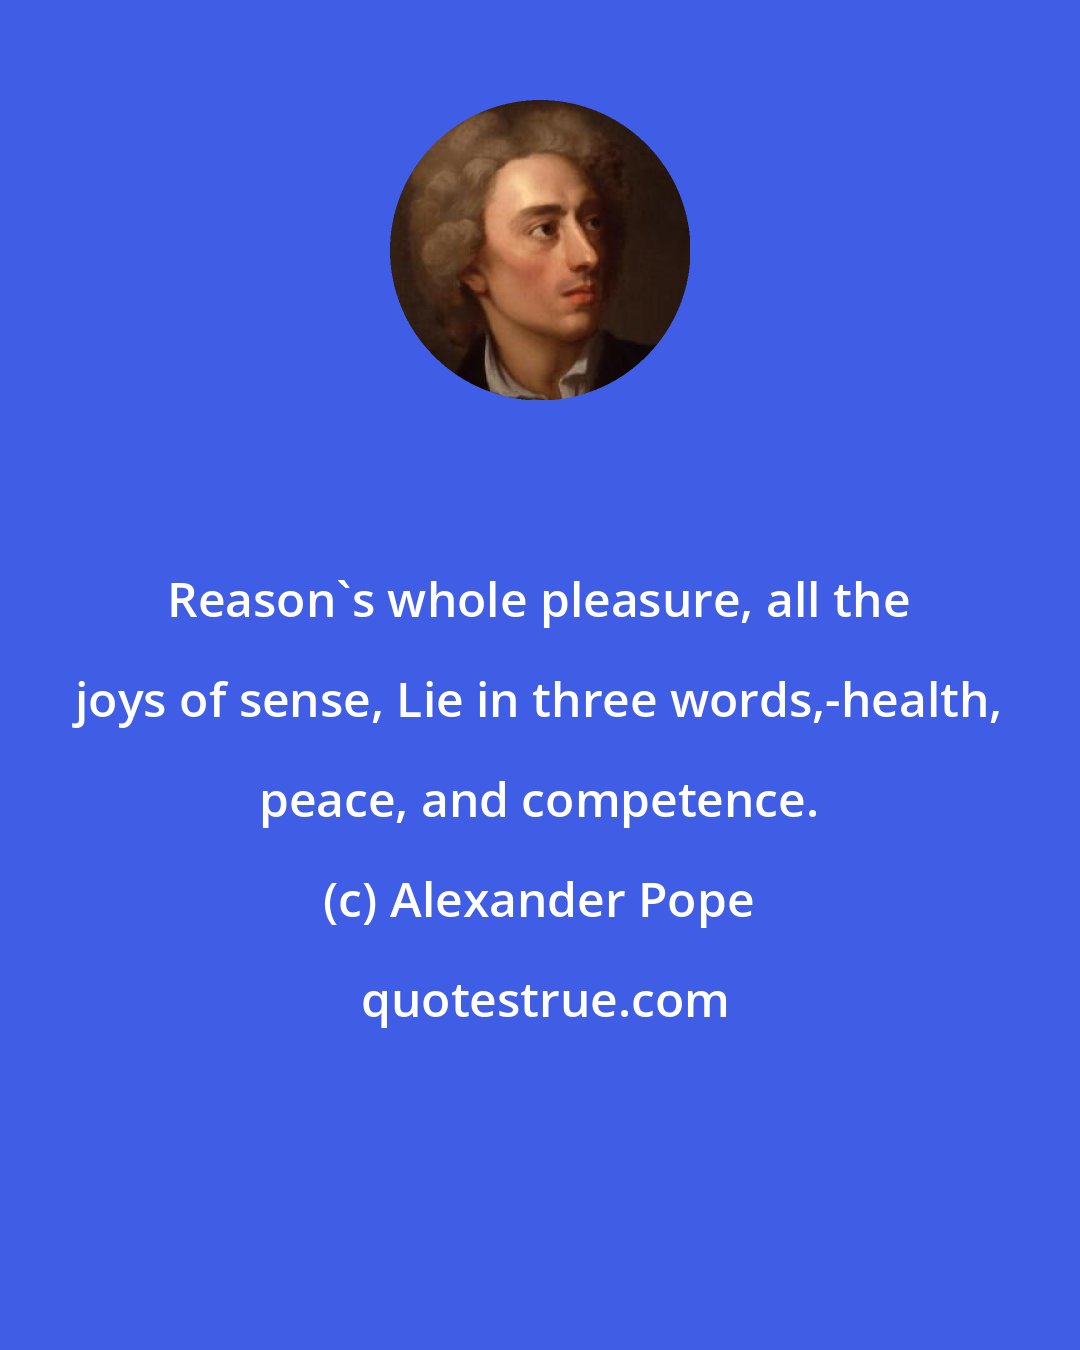 Alexander Pope: Reason's whole pleasure, all the joys of sense, Lie in three words,-health, peace, and competence.